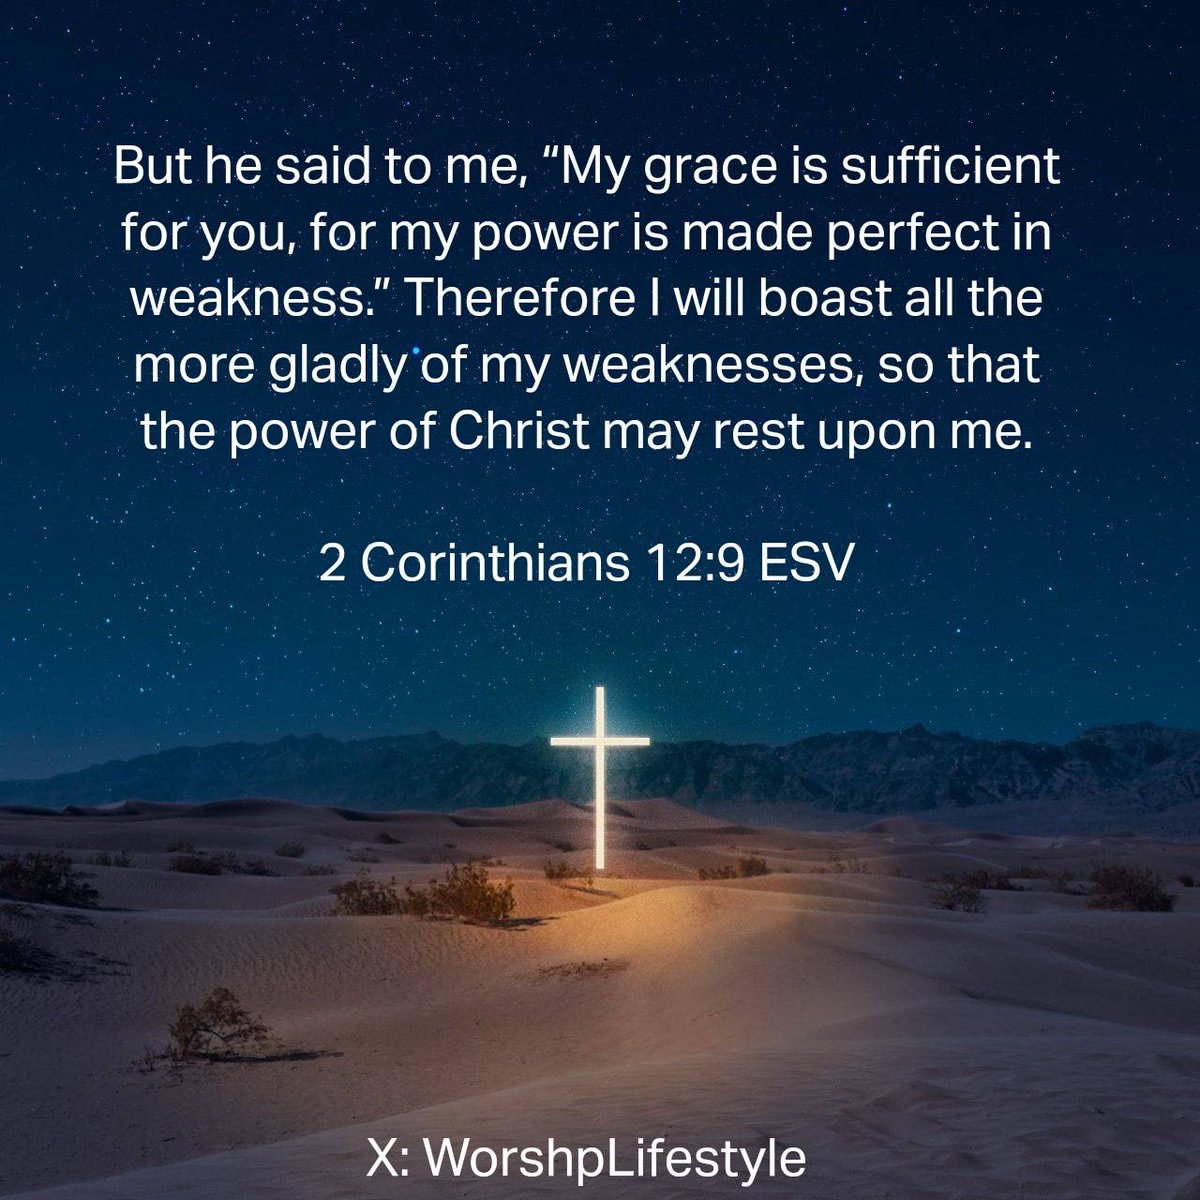 2 Corinthians 12:9
But he said to me, “My grace is sufficient for you, for my power is made perfect in weakness.” Therefore I will boast all the more gladly of my weaknesses, so that the power of Christ may rest upon me.
bible.com/bible/59/2co.1…
#VerseOfTheDay #WorshpLifestyle